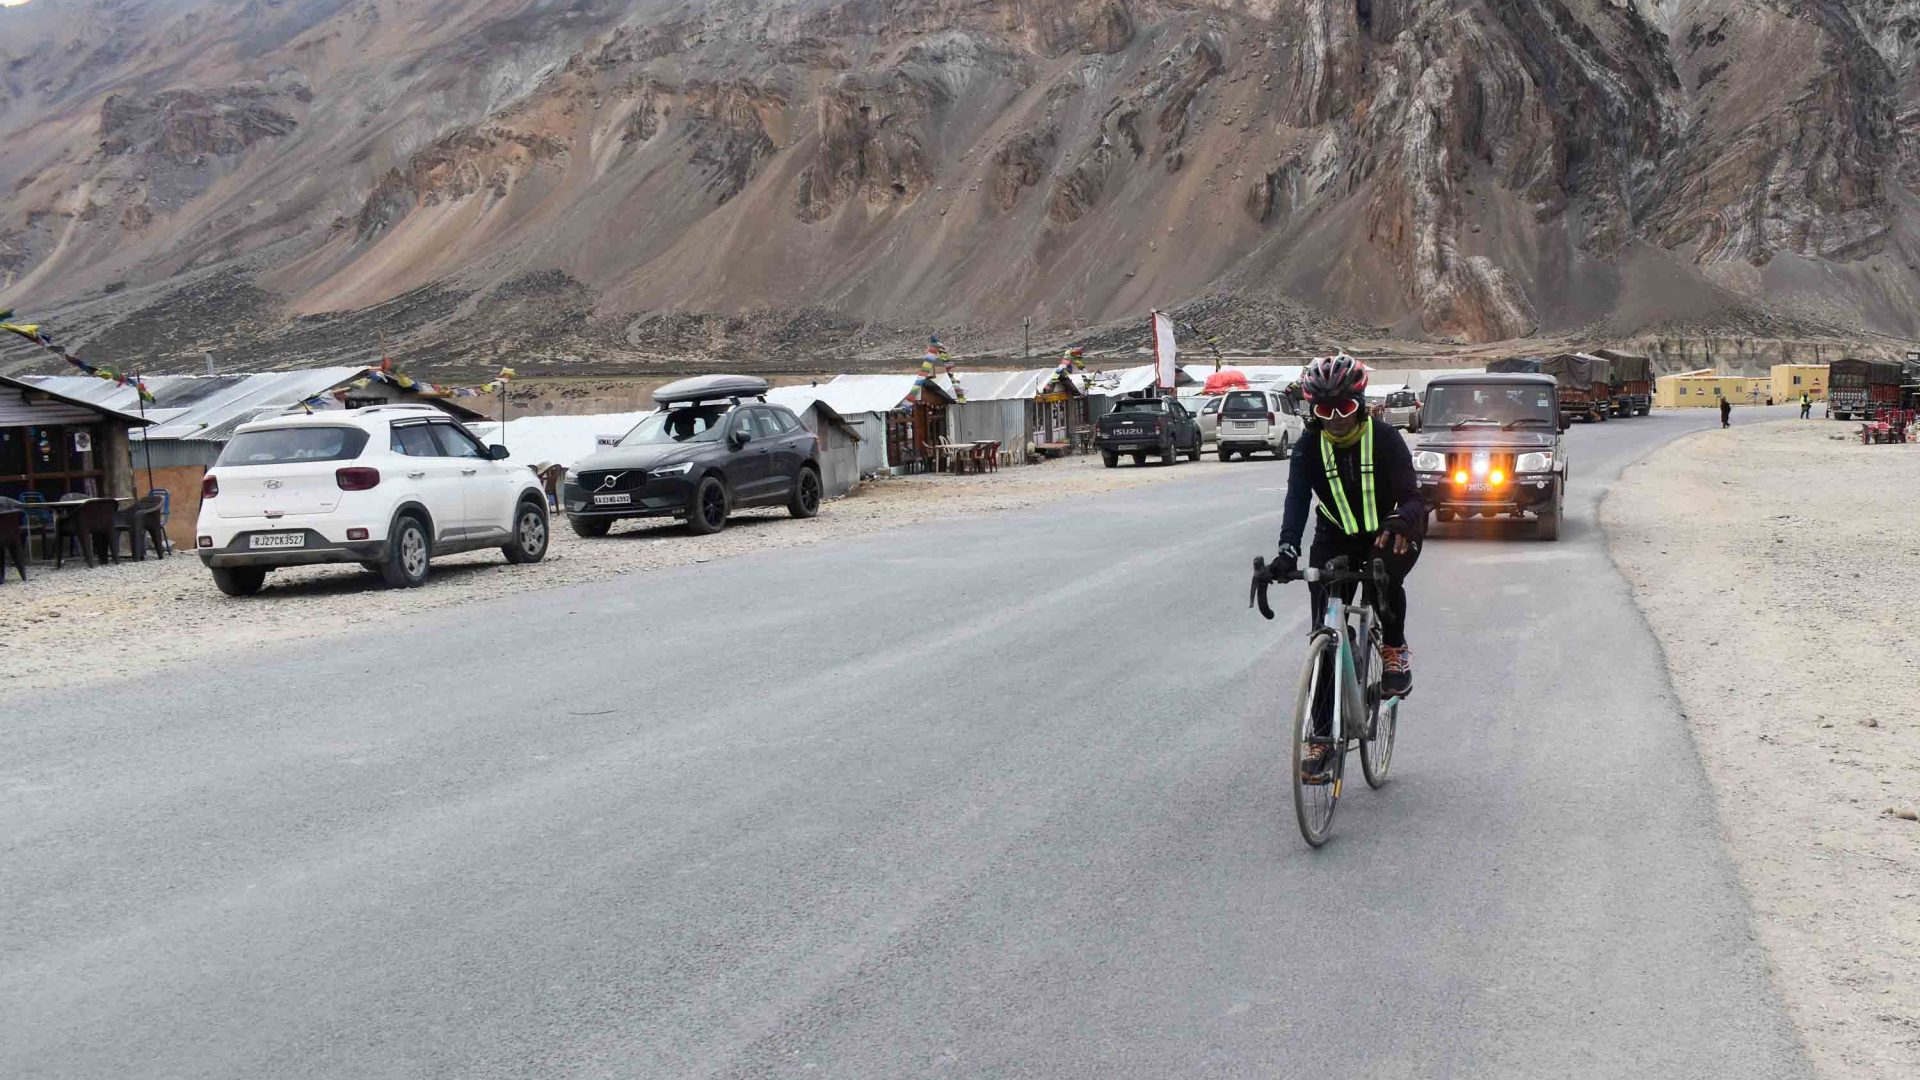 Preeti cycling past cars and arid mountains.